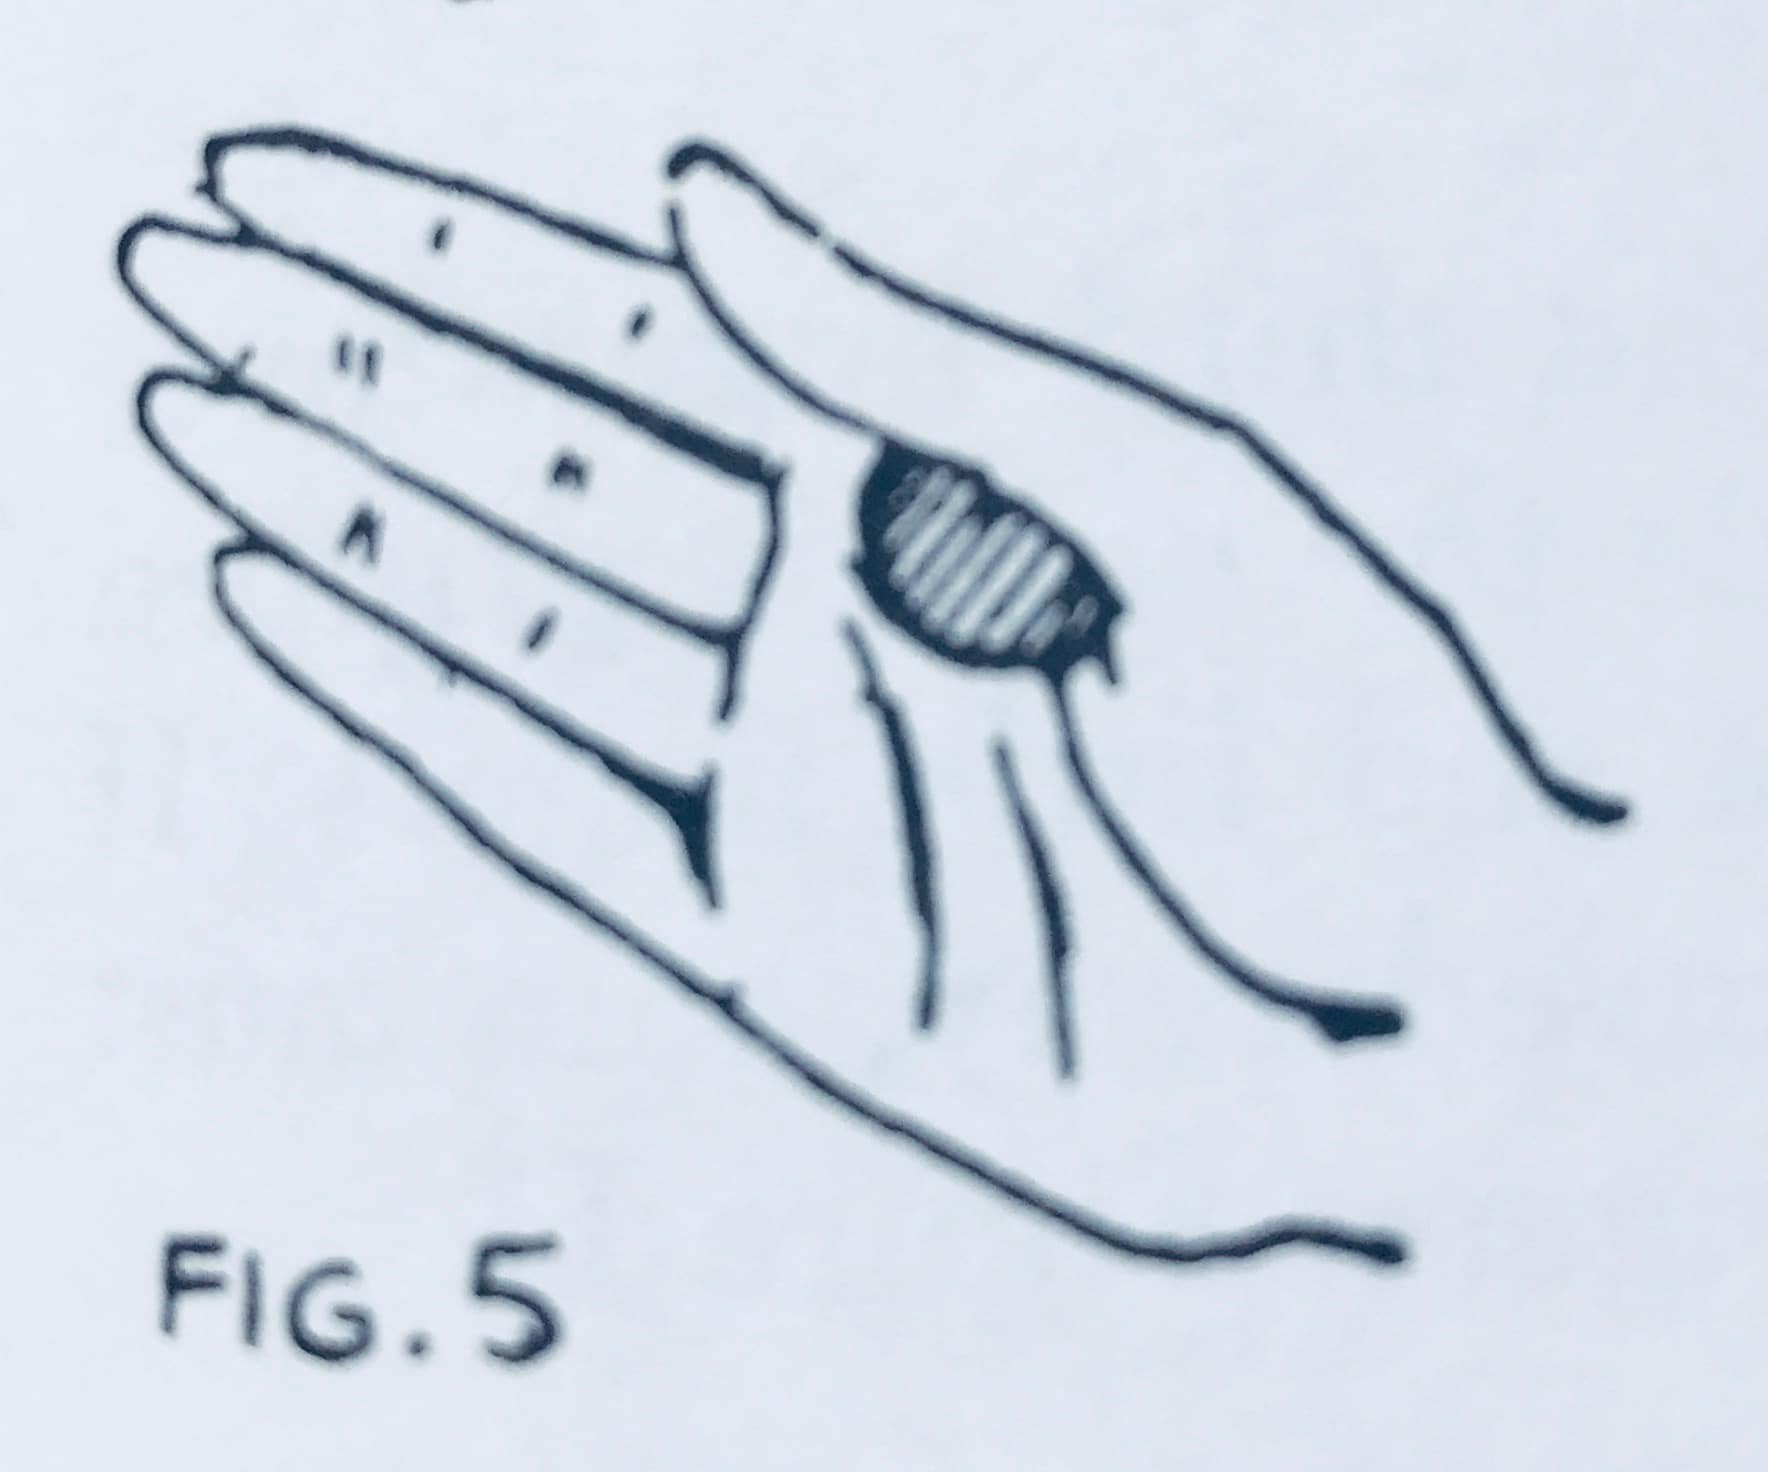 The Front Thumb Palm